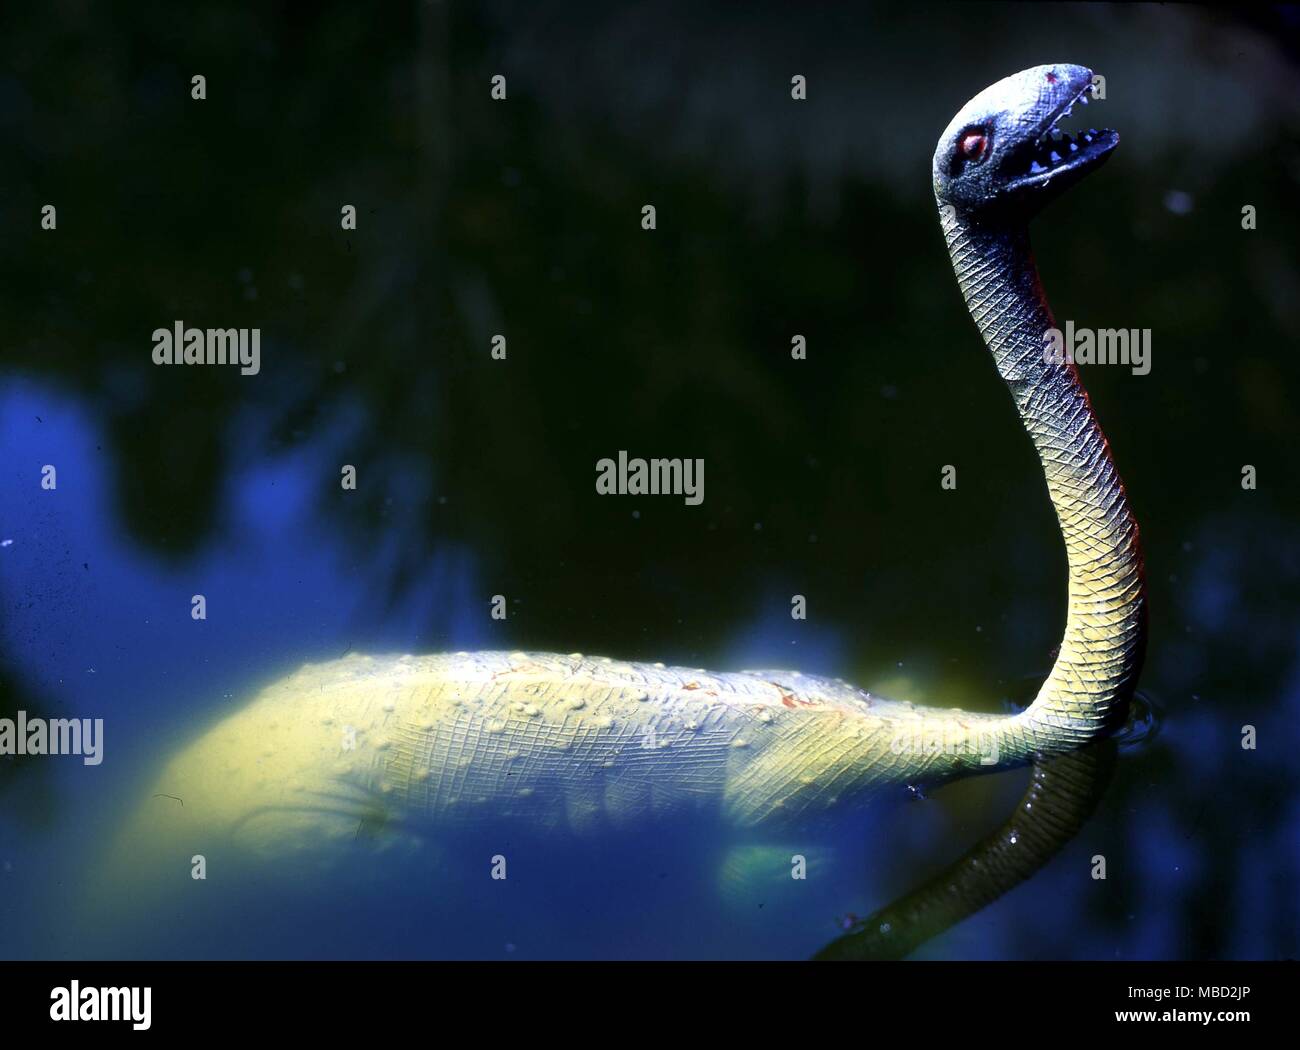 Model of the Loch Ness monster - Nessie - constructed from authenticated sightings. Stock Photo